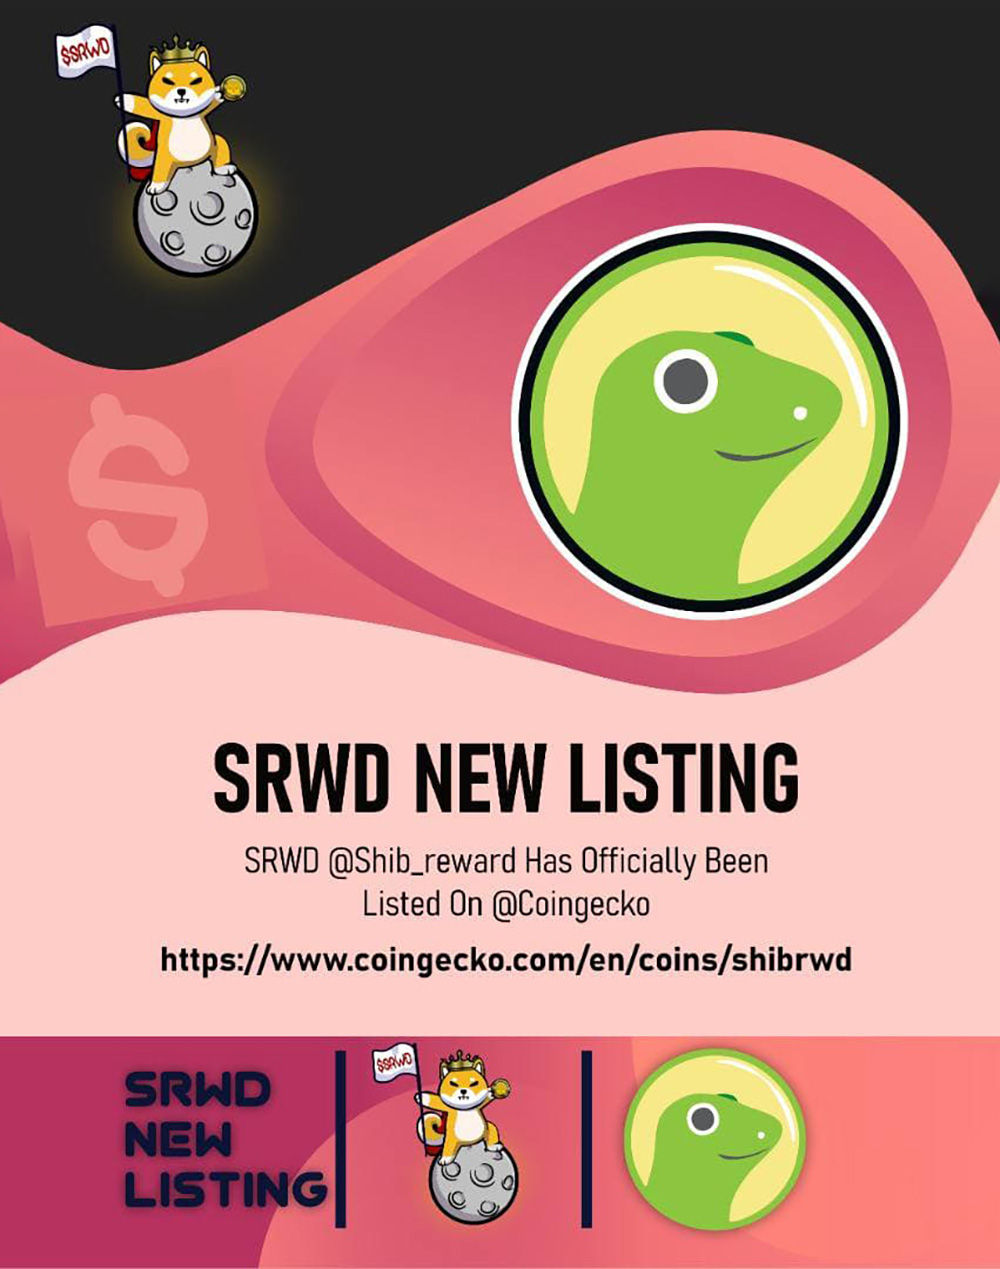 ShibRWD Is Much More Than a Meme Token- $SRWD Aims to Bring Major Value to the Holders and Expand & Empower the SHIB Ecosystem